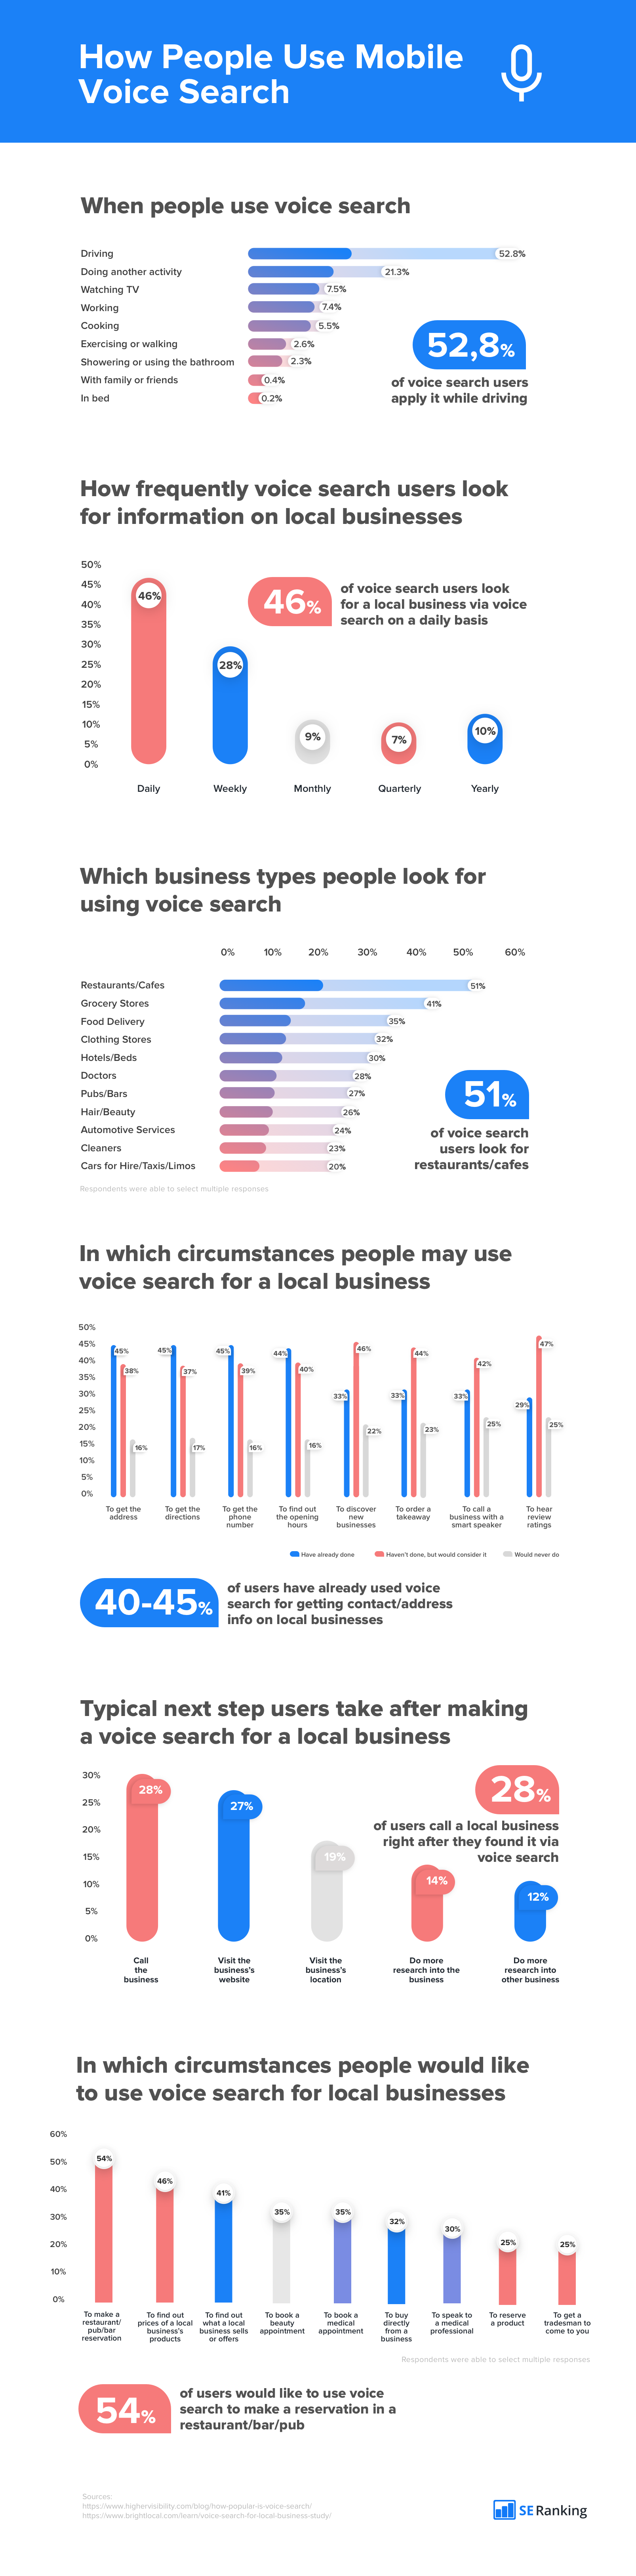 How people use mobile voice search - infographic